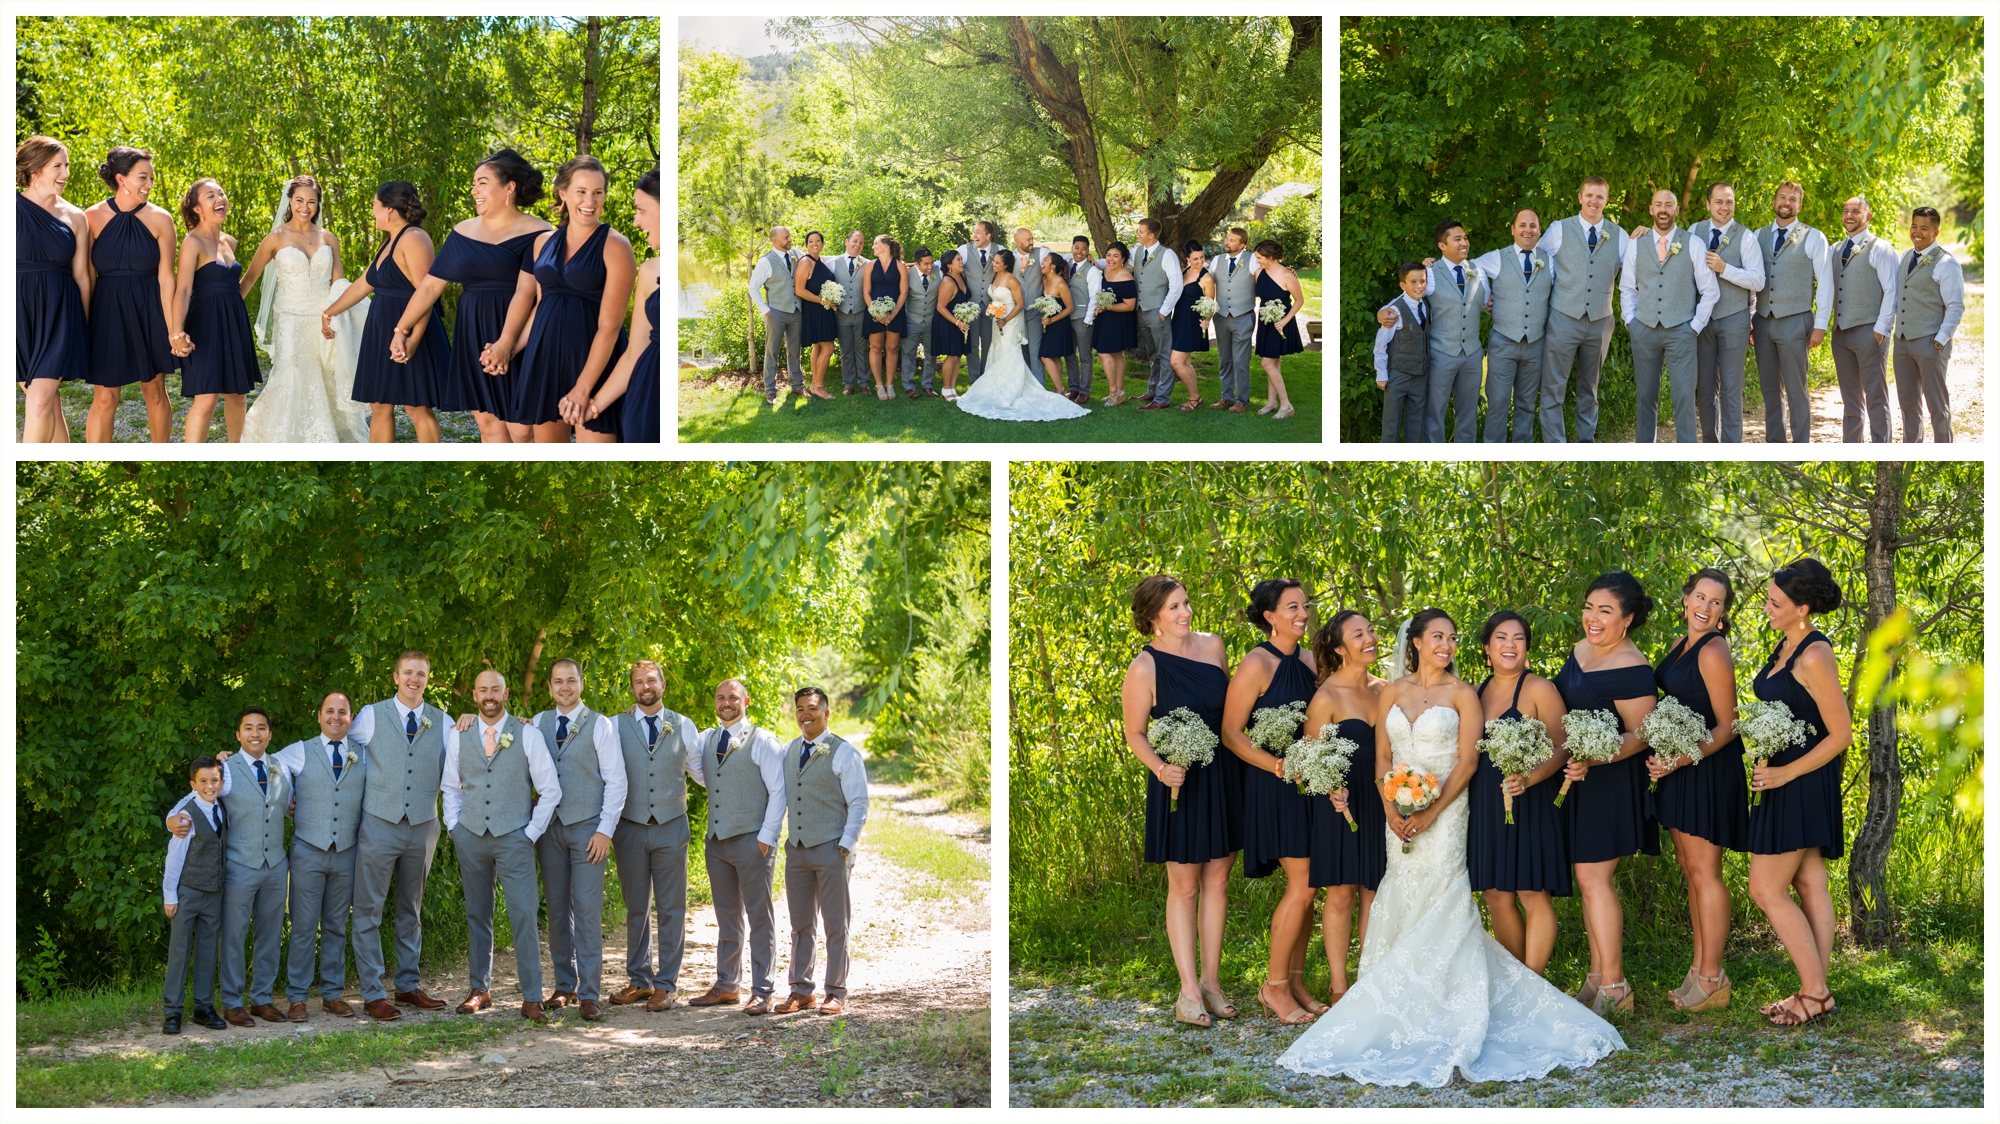 bridal party photos at stone mountain lodge wedding in july